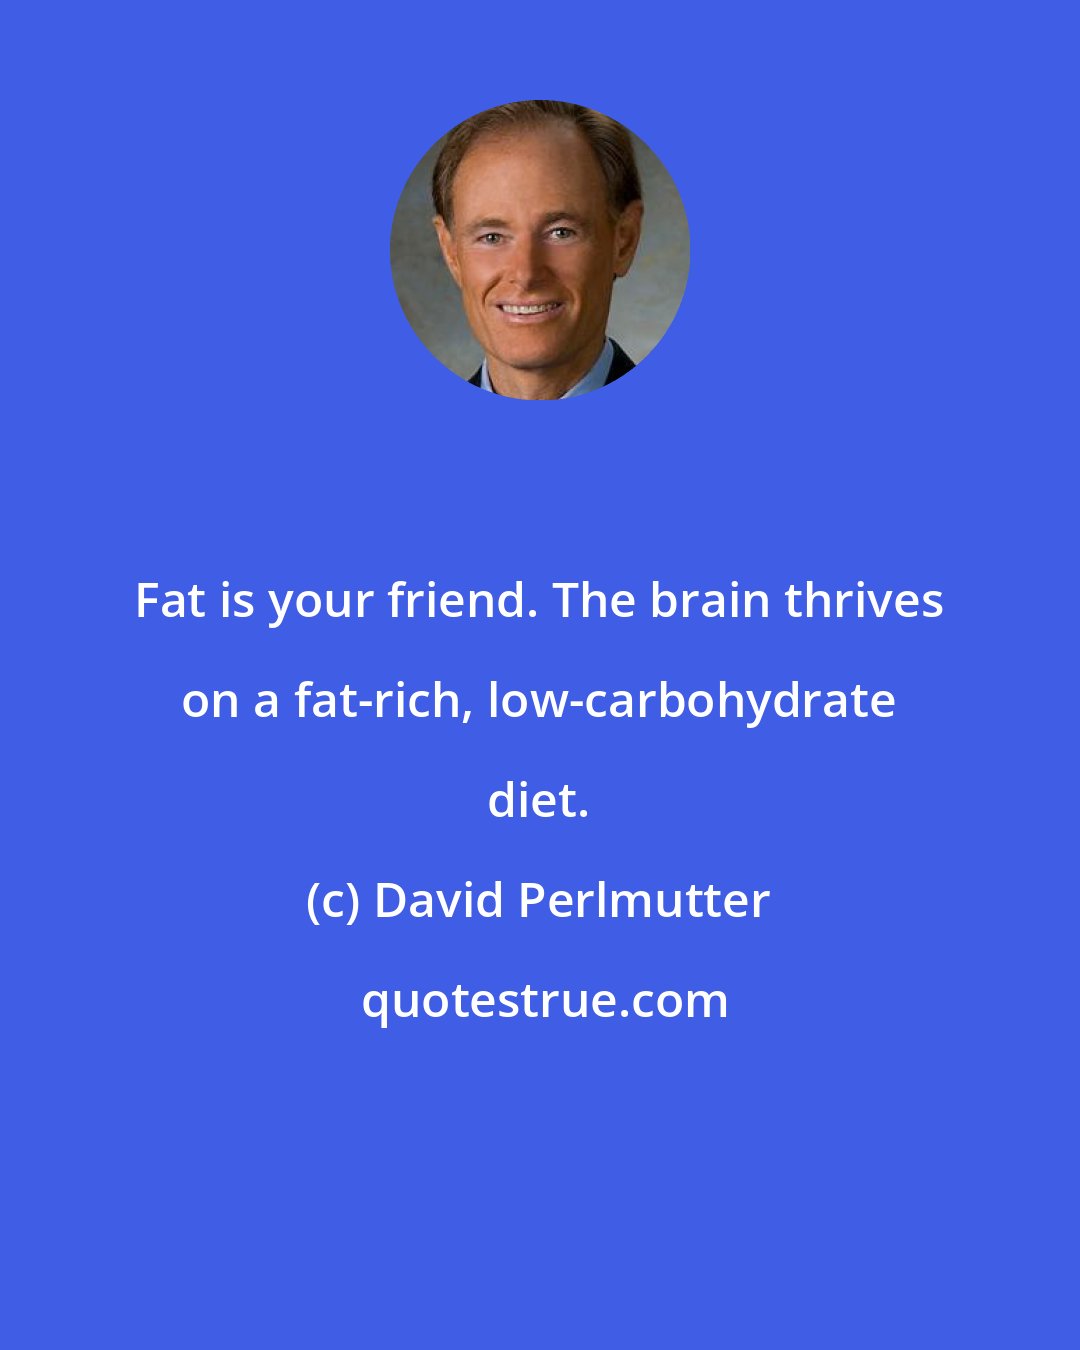 David Perlmutter: Fat is your friend. The brain thrives on a fat-rich, low-carbohydrate diet.